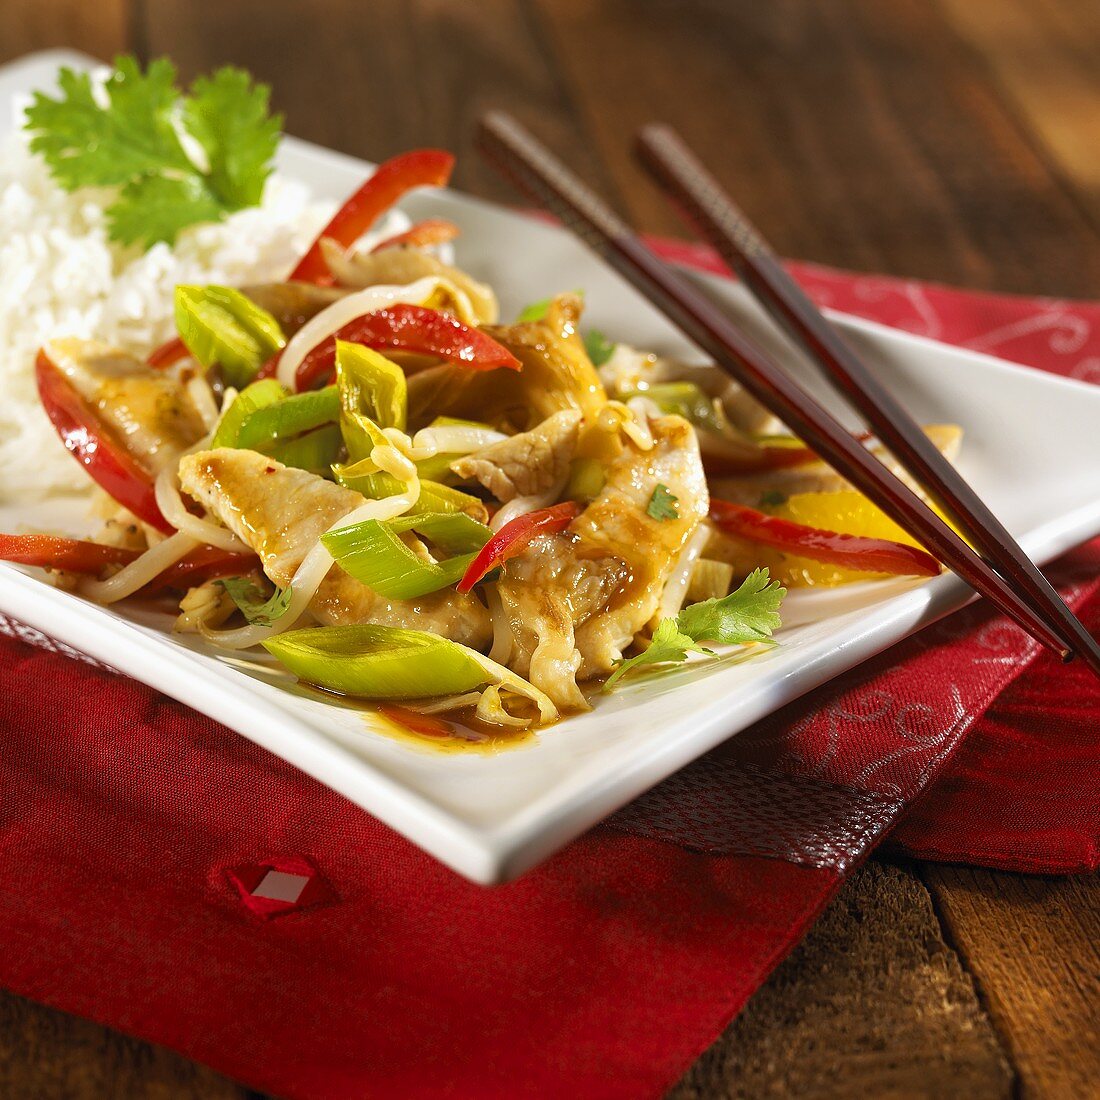 Strips of turkey with vegetables and rice (China)